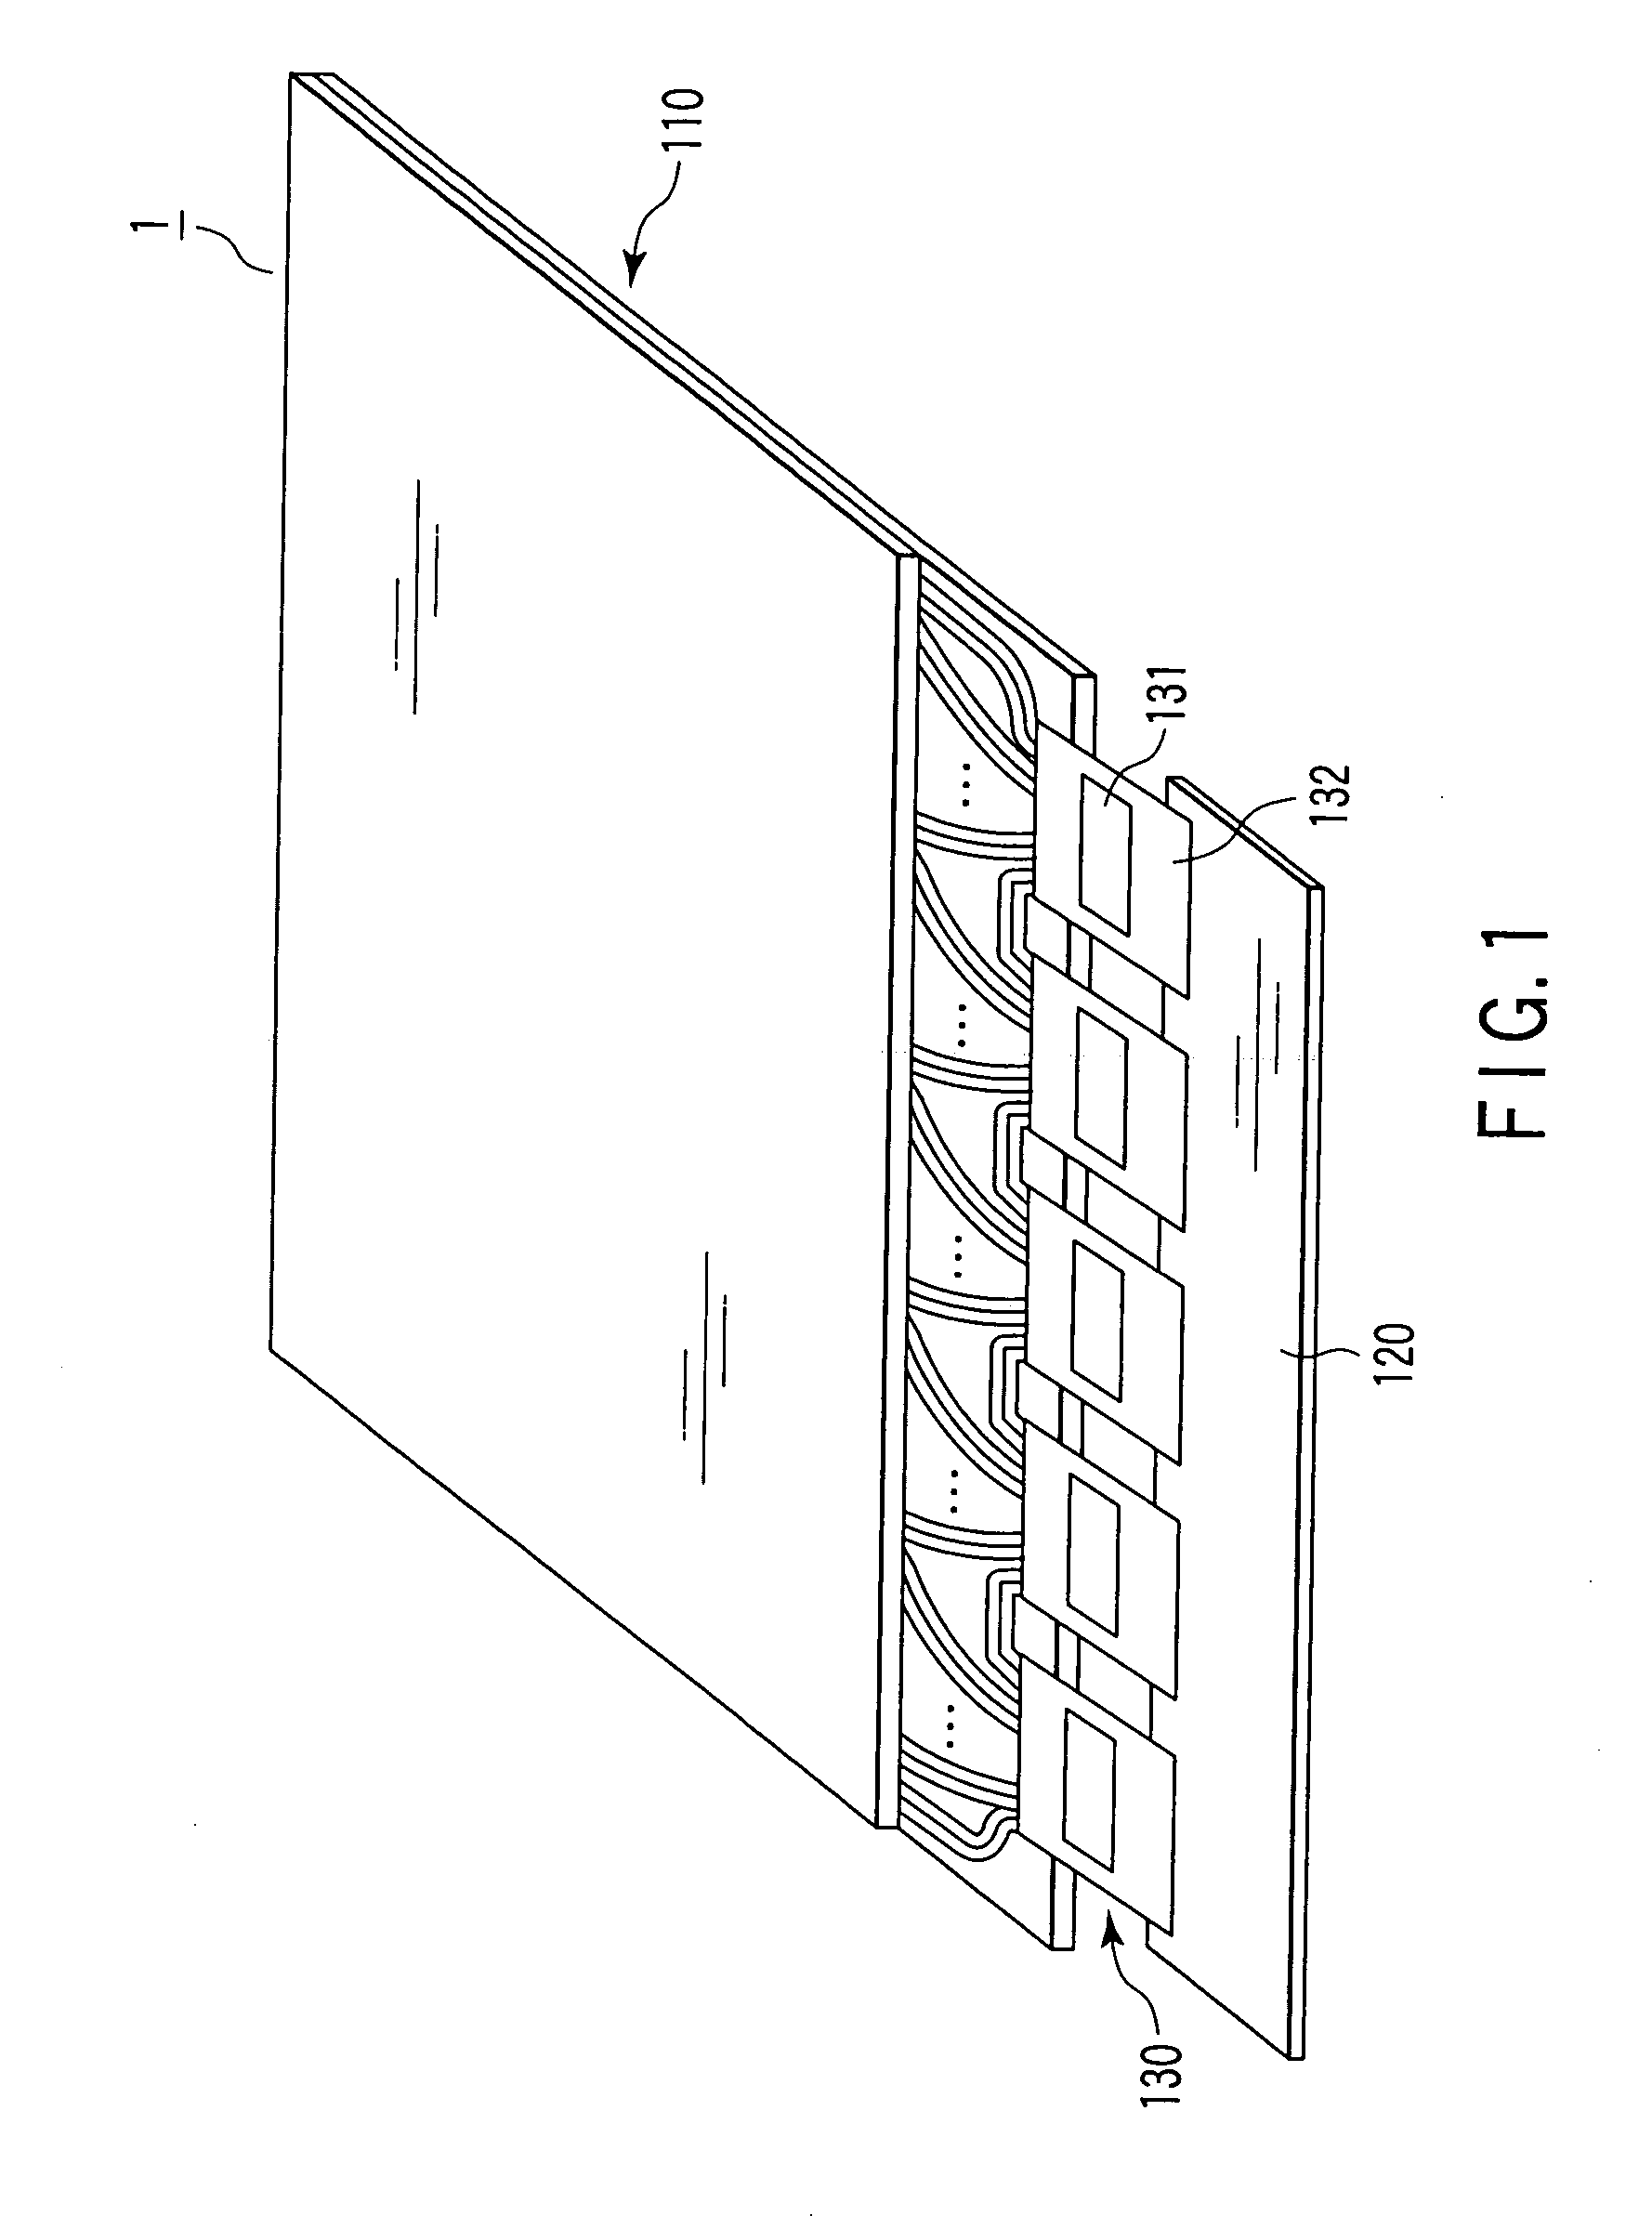 Display, wiring board, and method of manufacturing the same